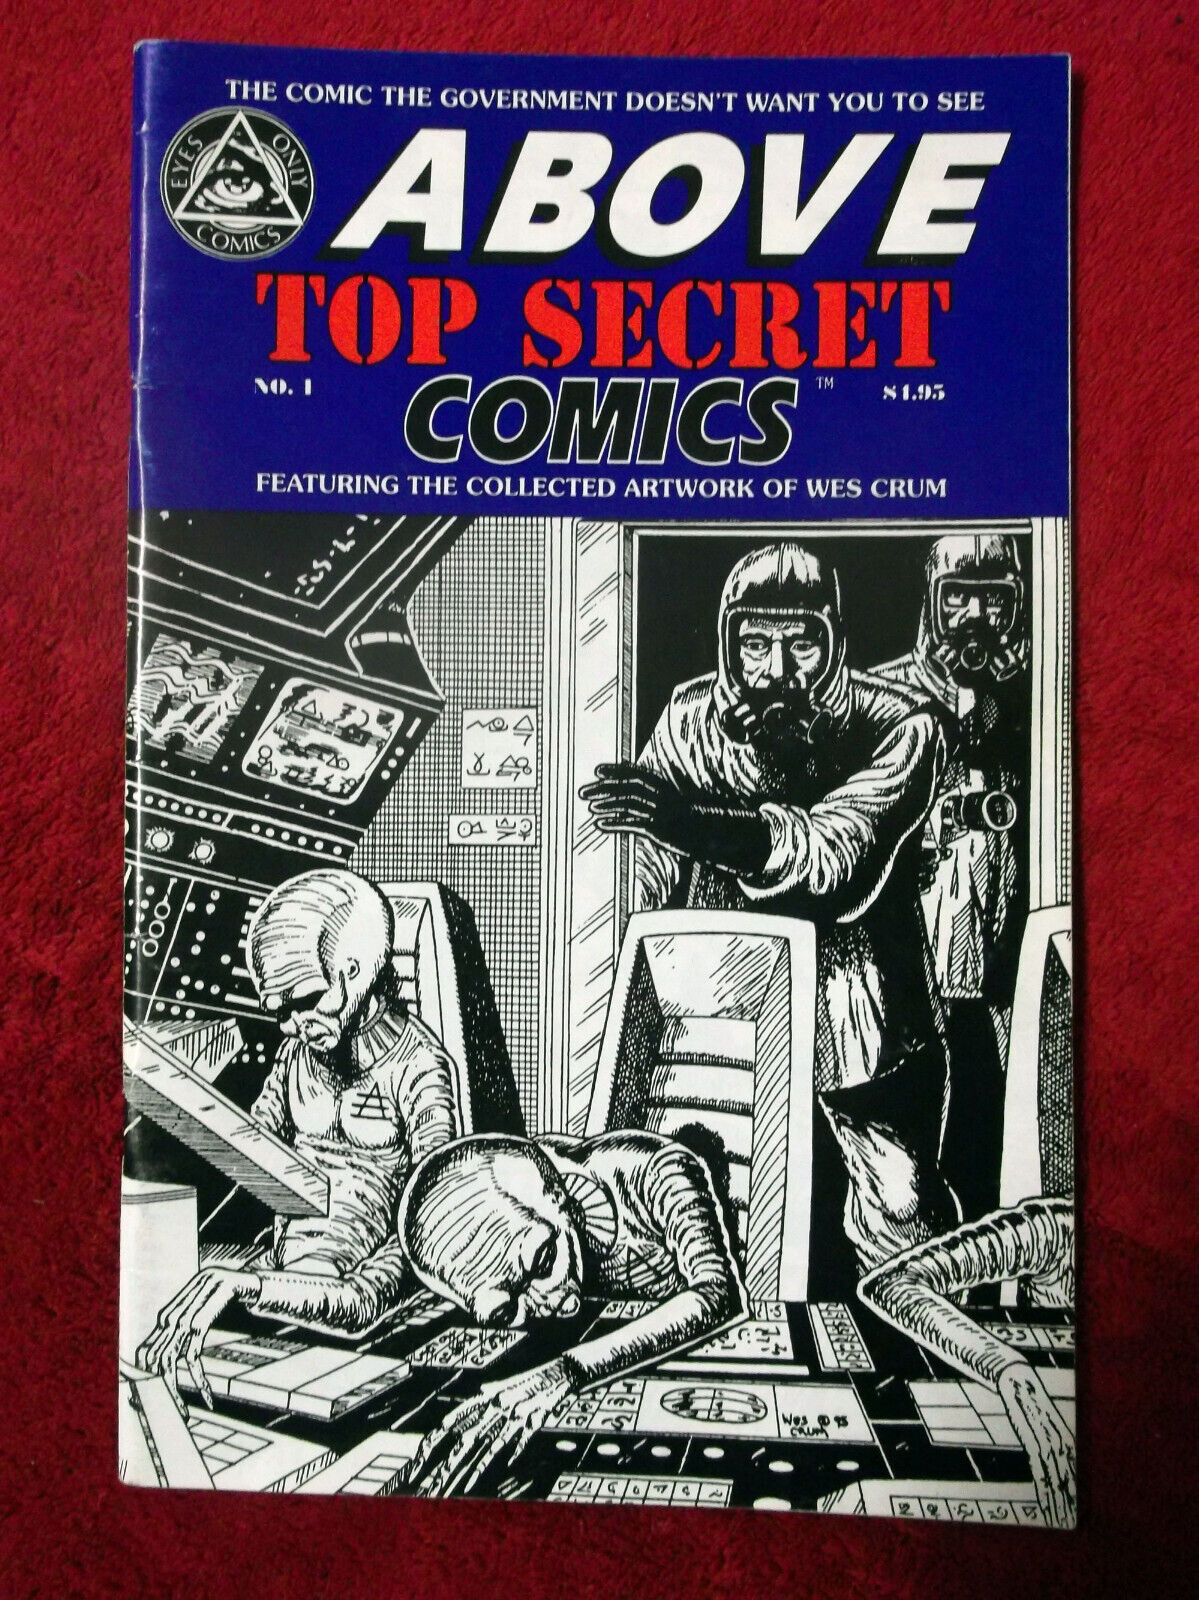 Above Top Secret Comics #1 - Collected work of Wes Crum - AUTOGRAPHED